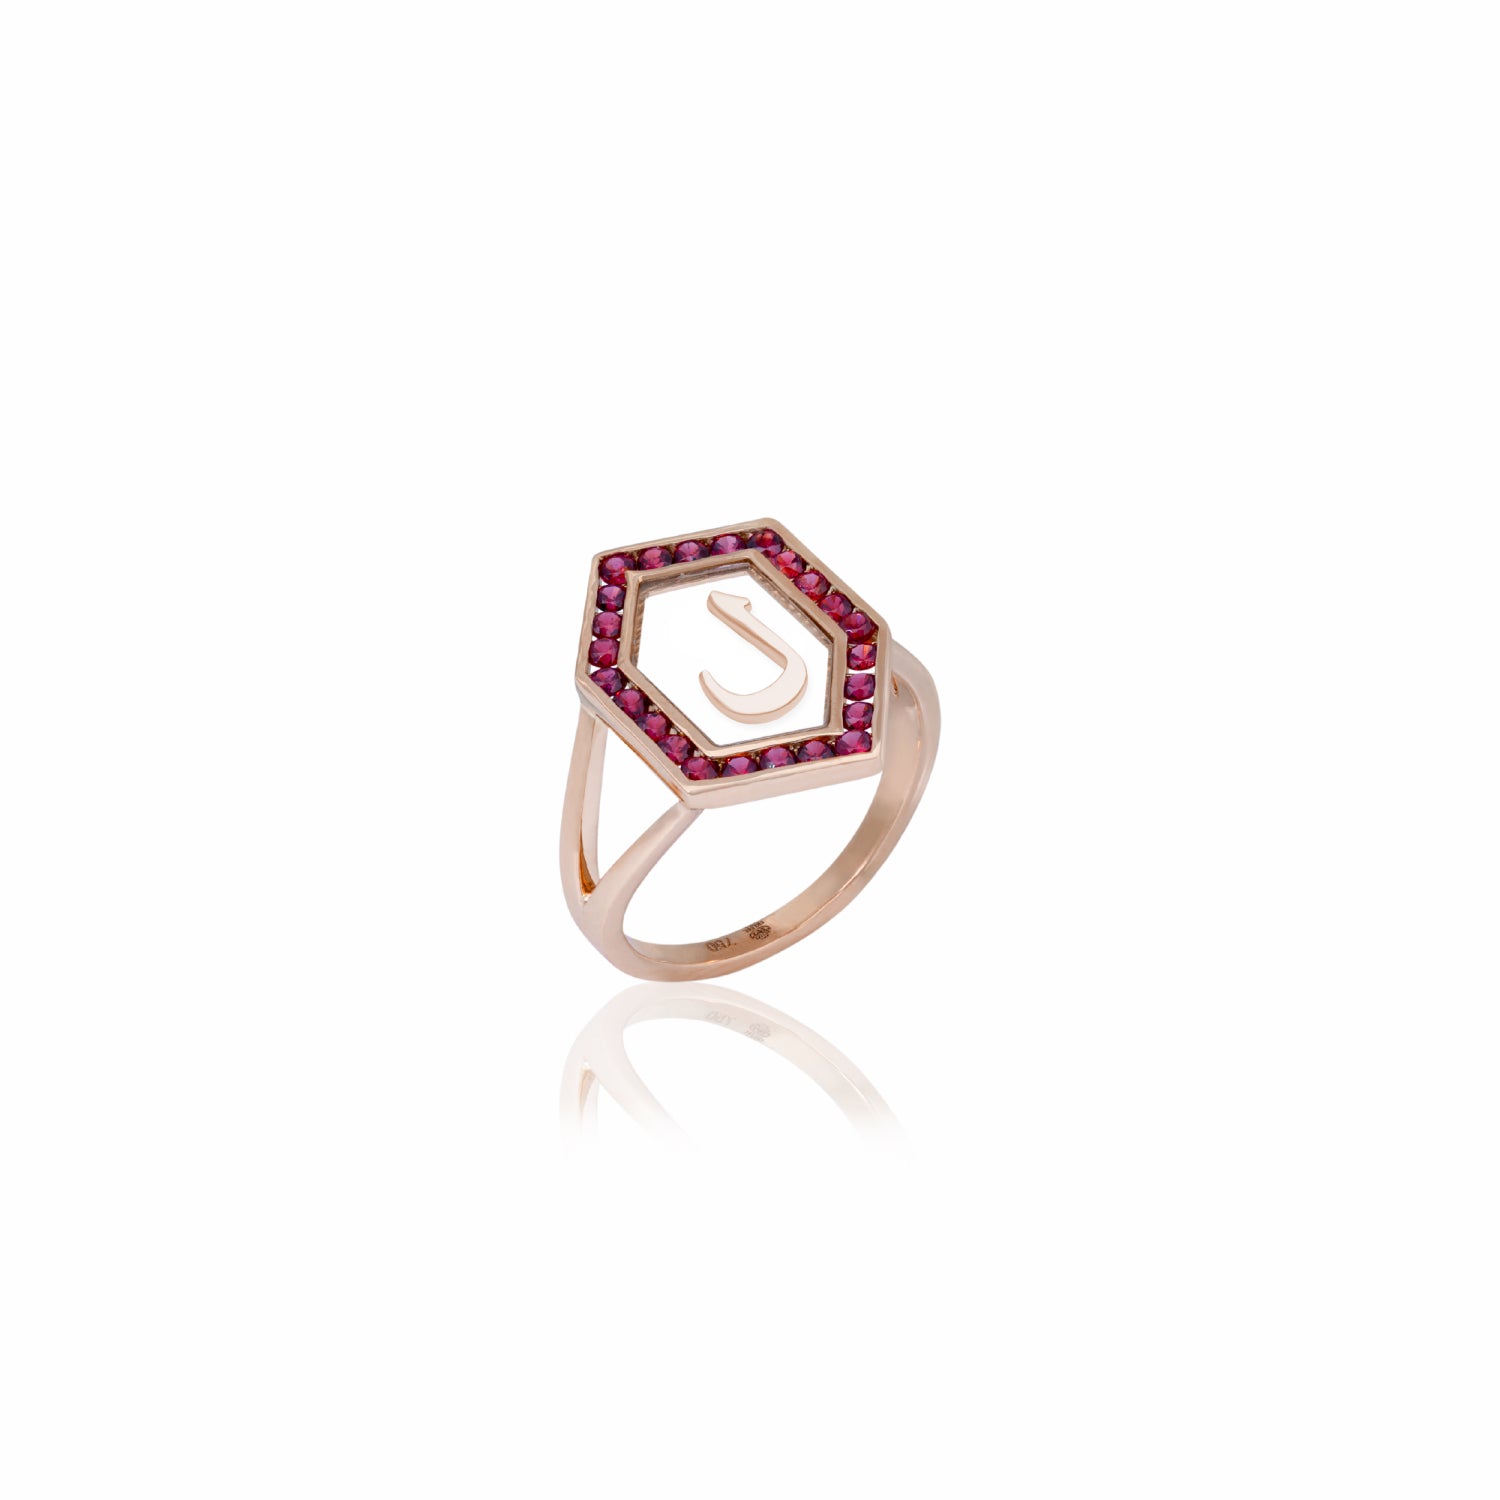 Qamoos 1.0 Letter ل Ruby Ring in Rose Gold